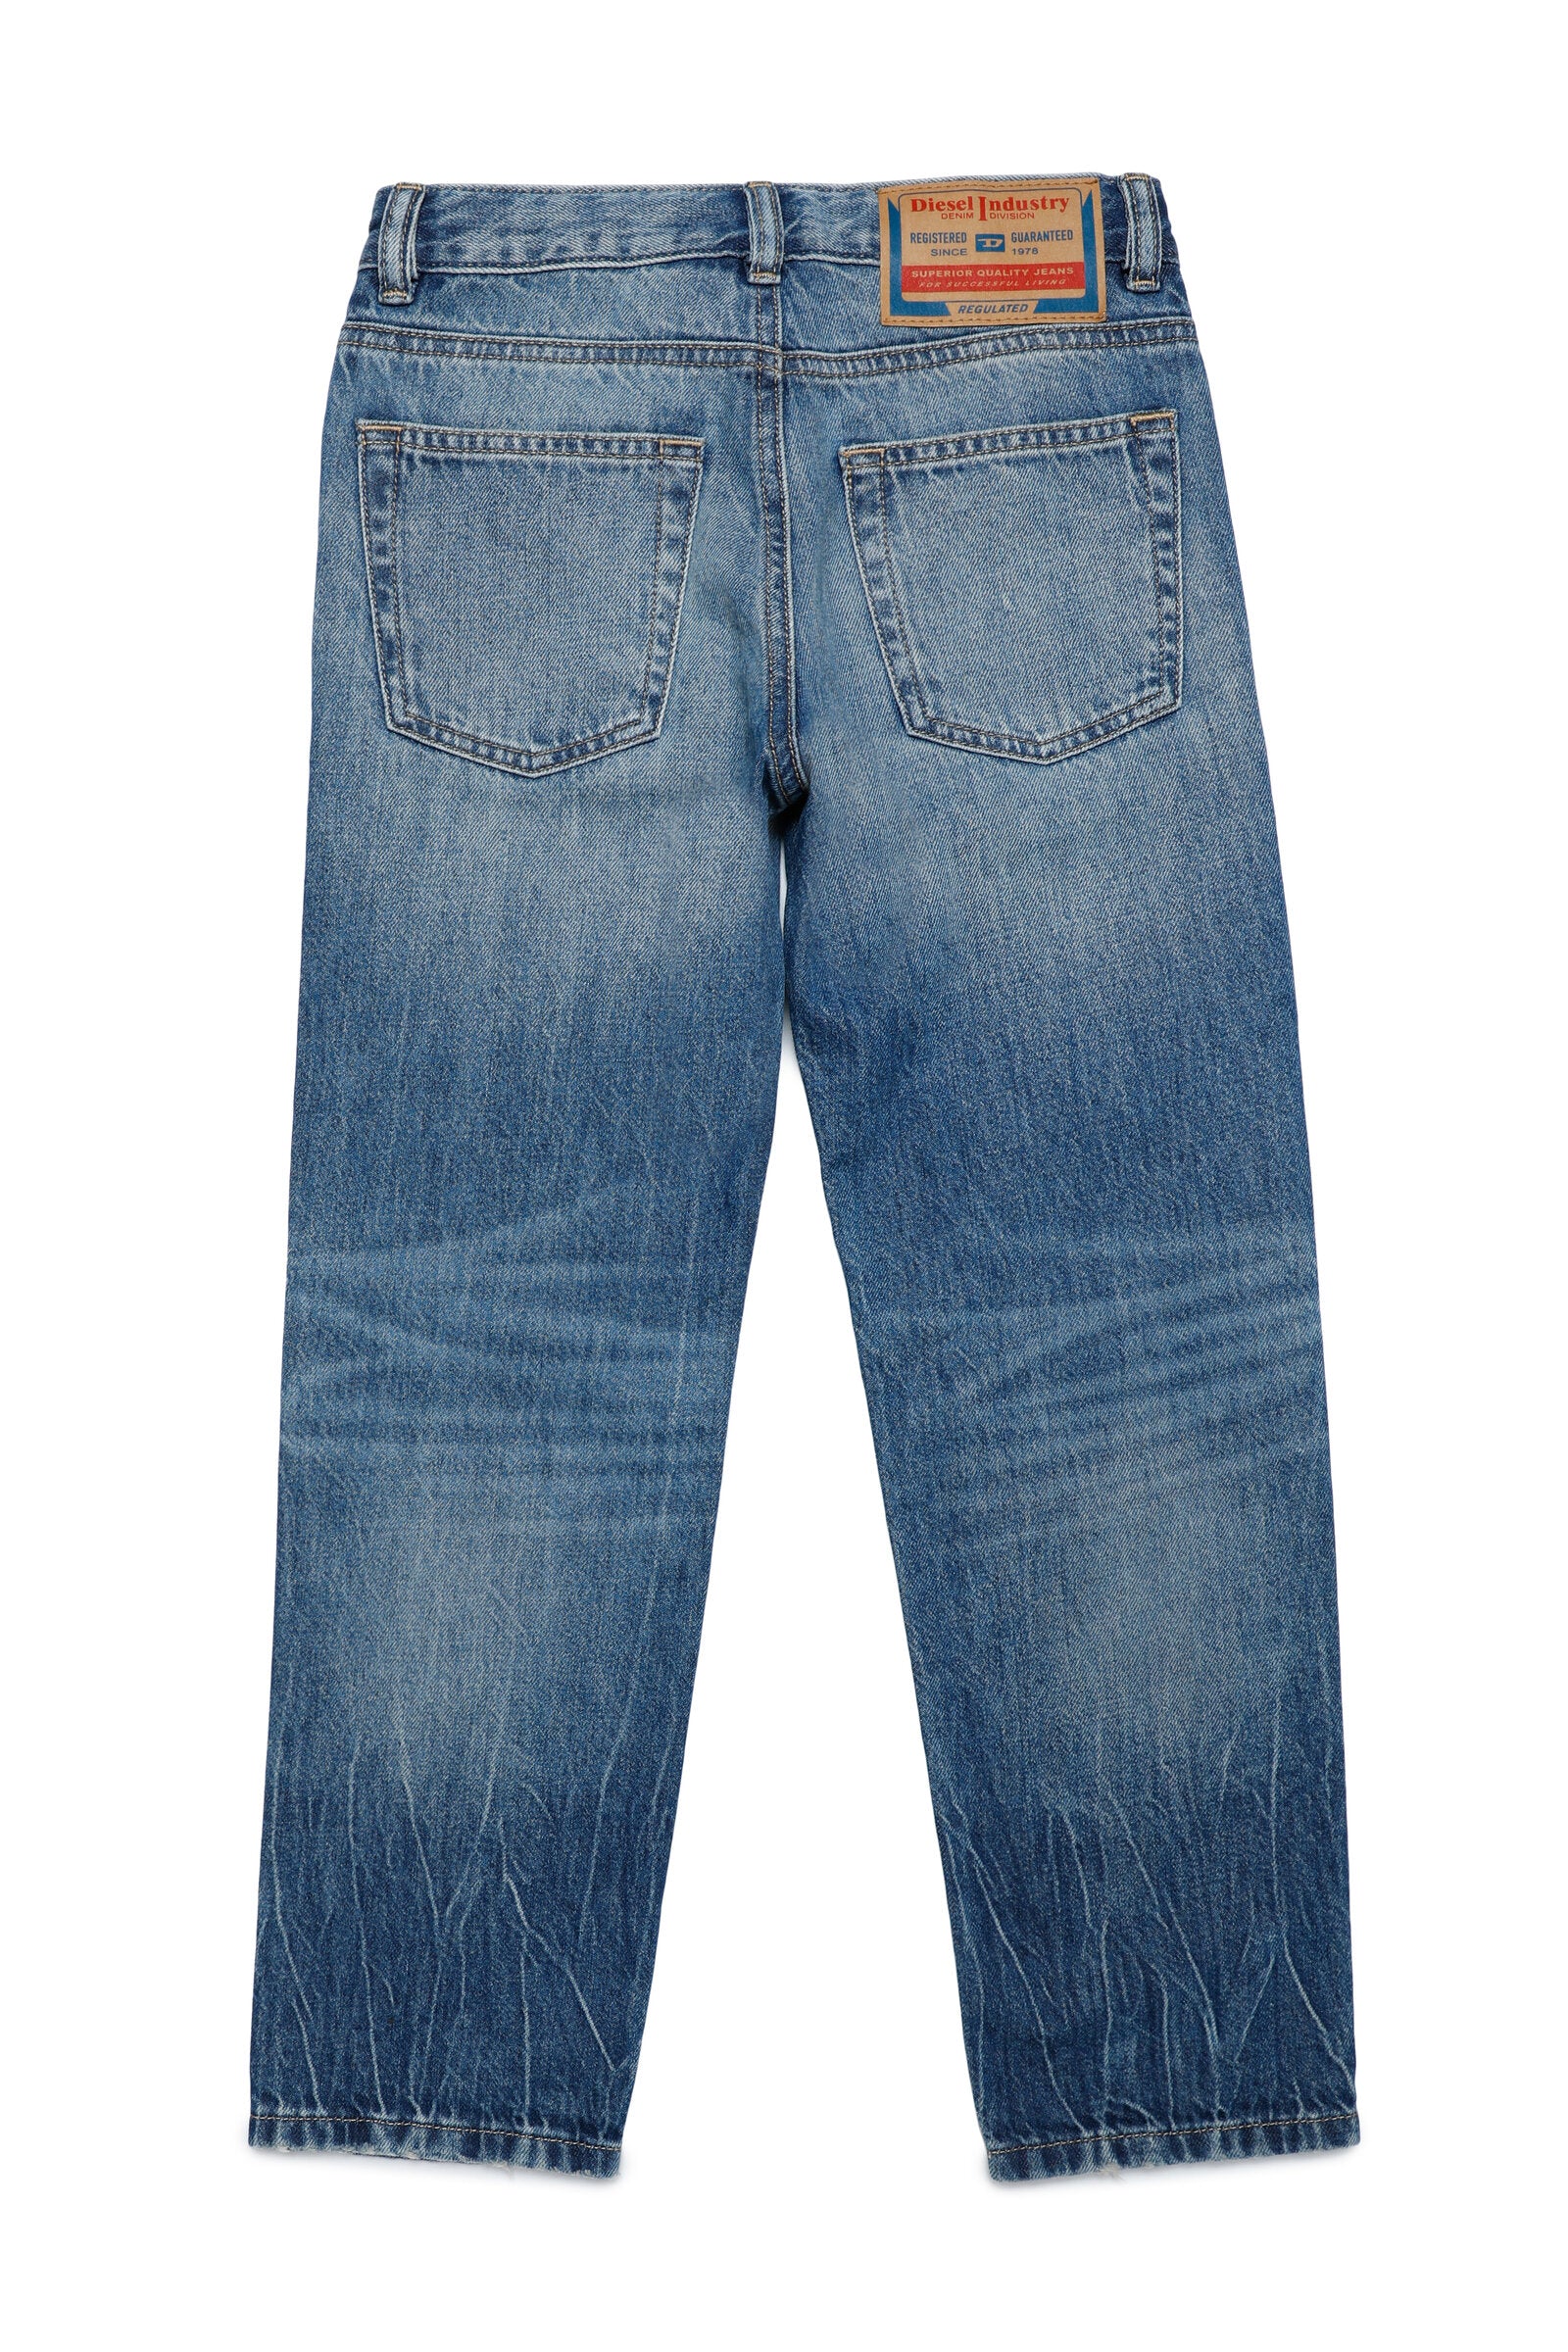 Jeans 2010 blue straight with abrasions and tears